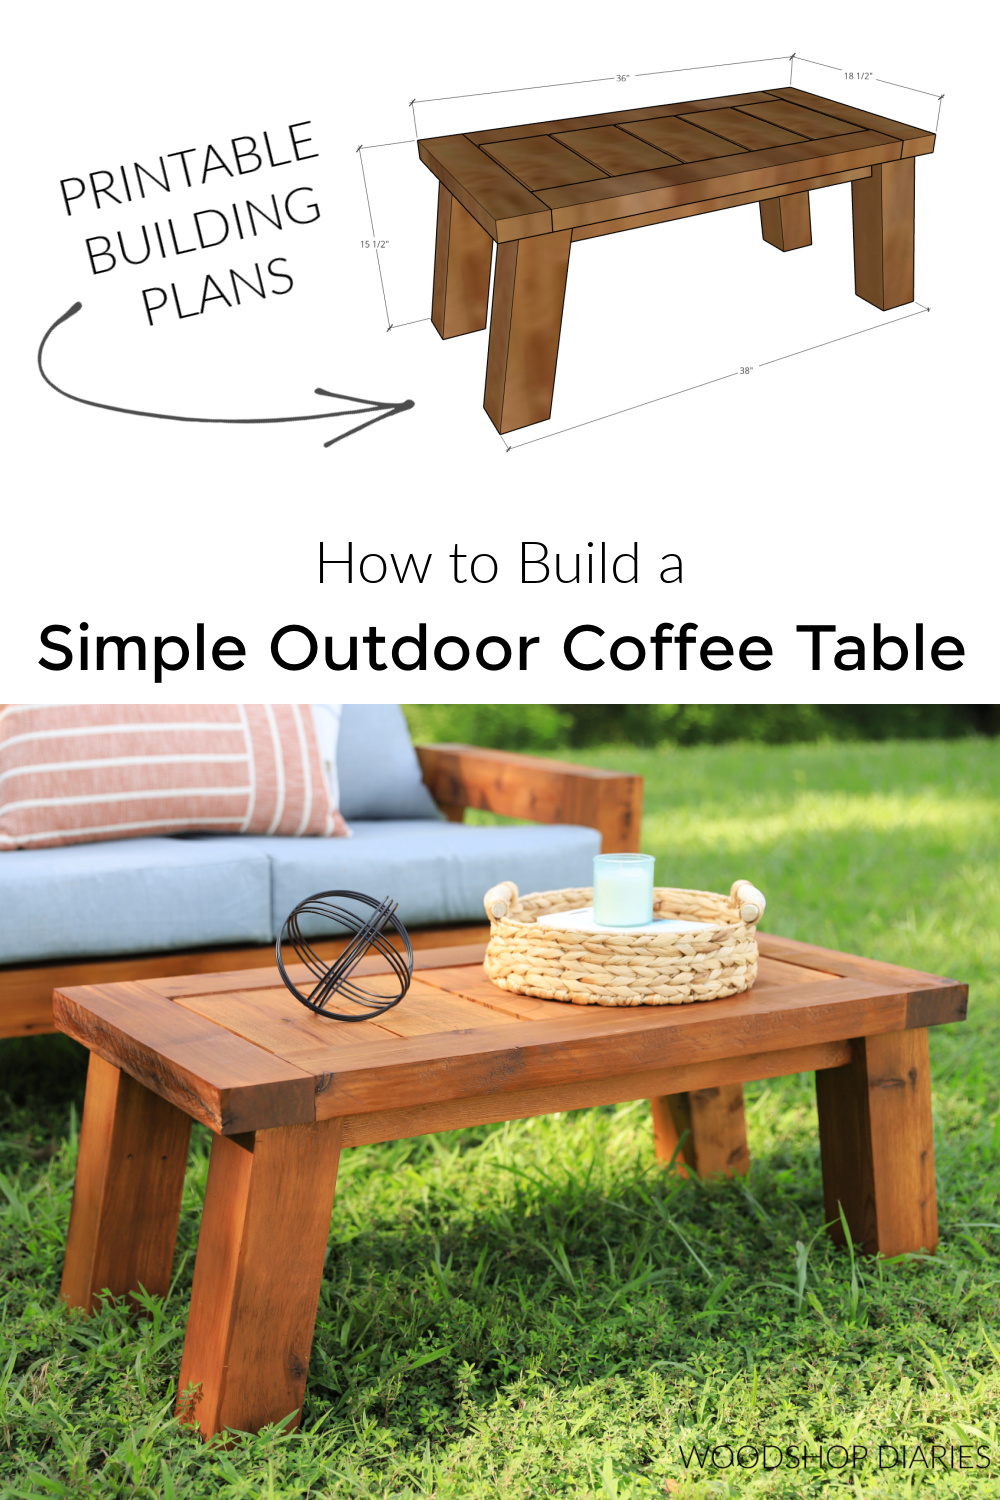 Pinterest collage image showing finished outdoor coffee table on bottom with dimensional diagram on top with text "printable building plans" and "how to build a simple outdoor coffee table"